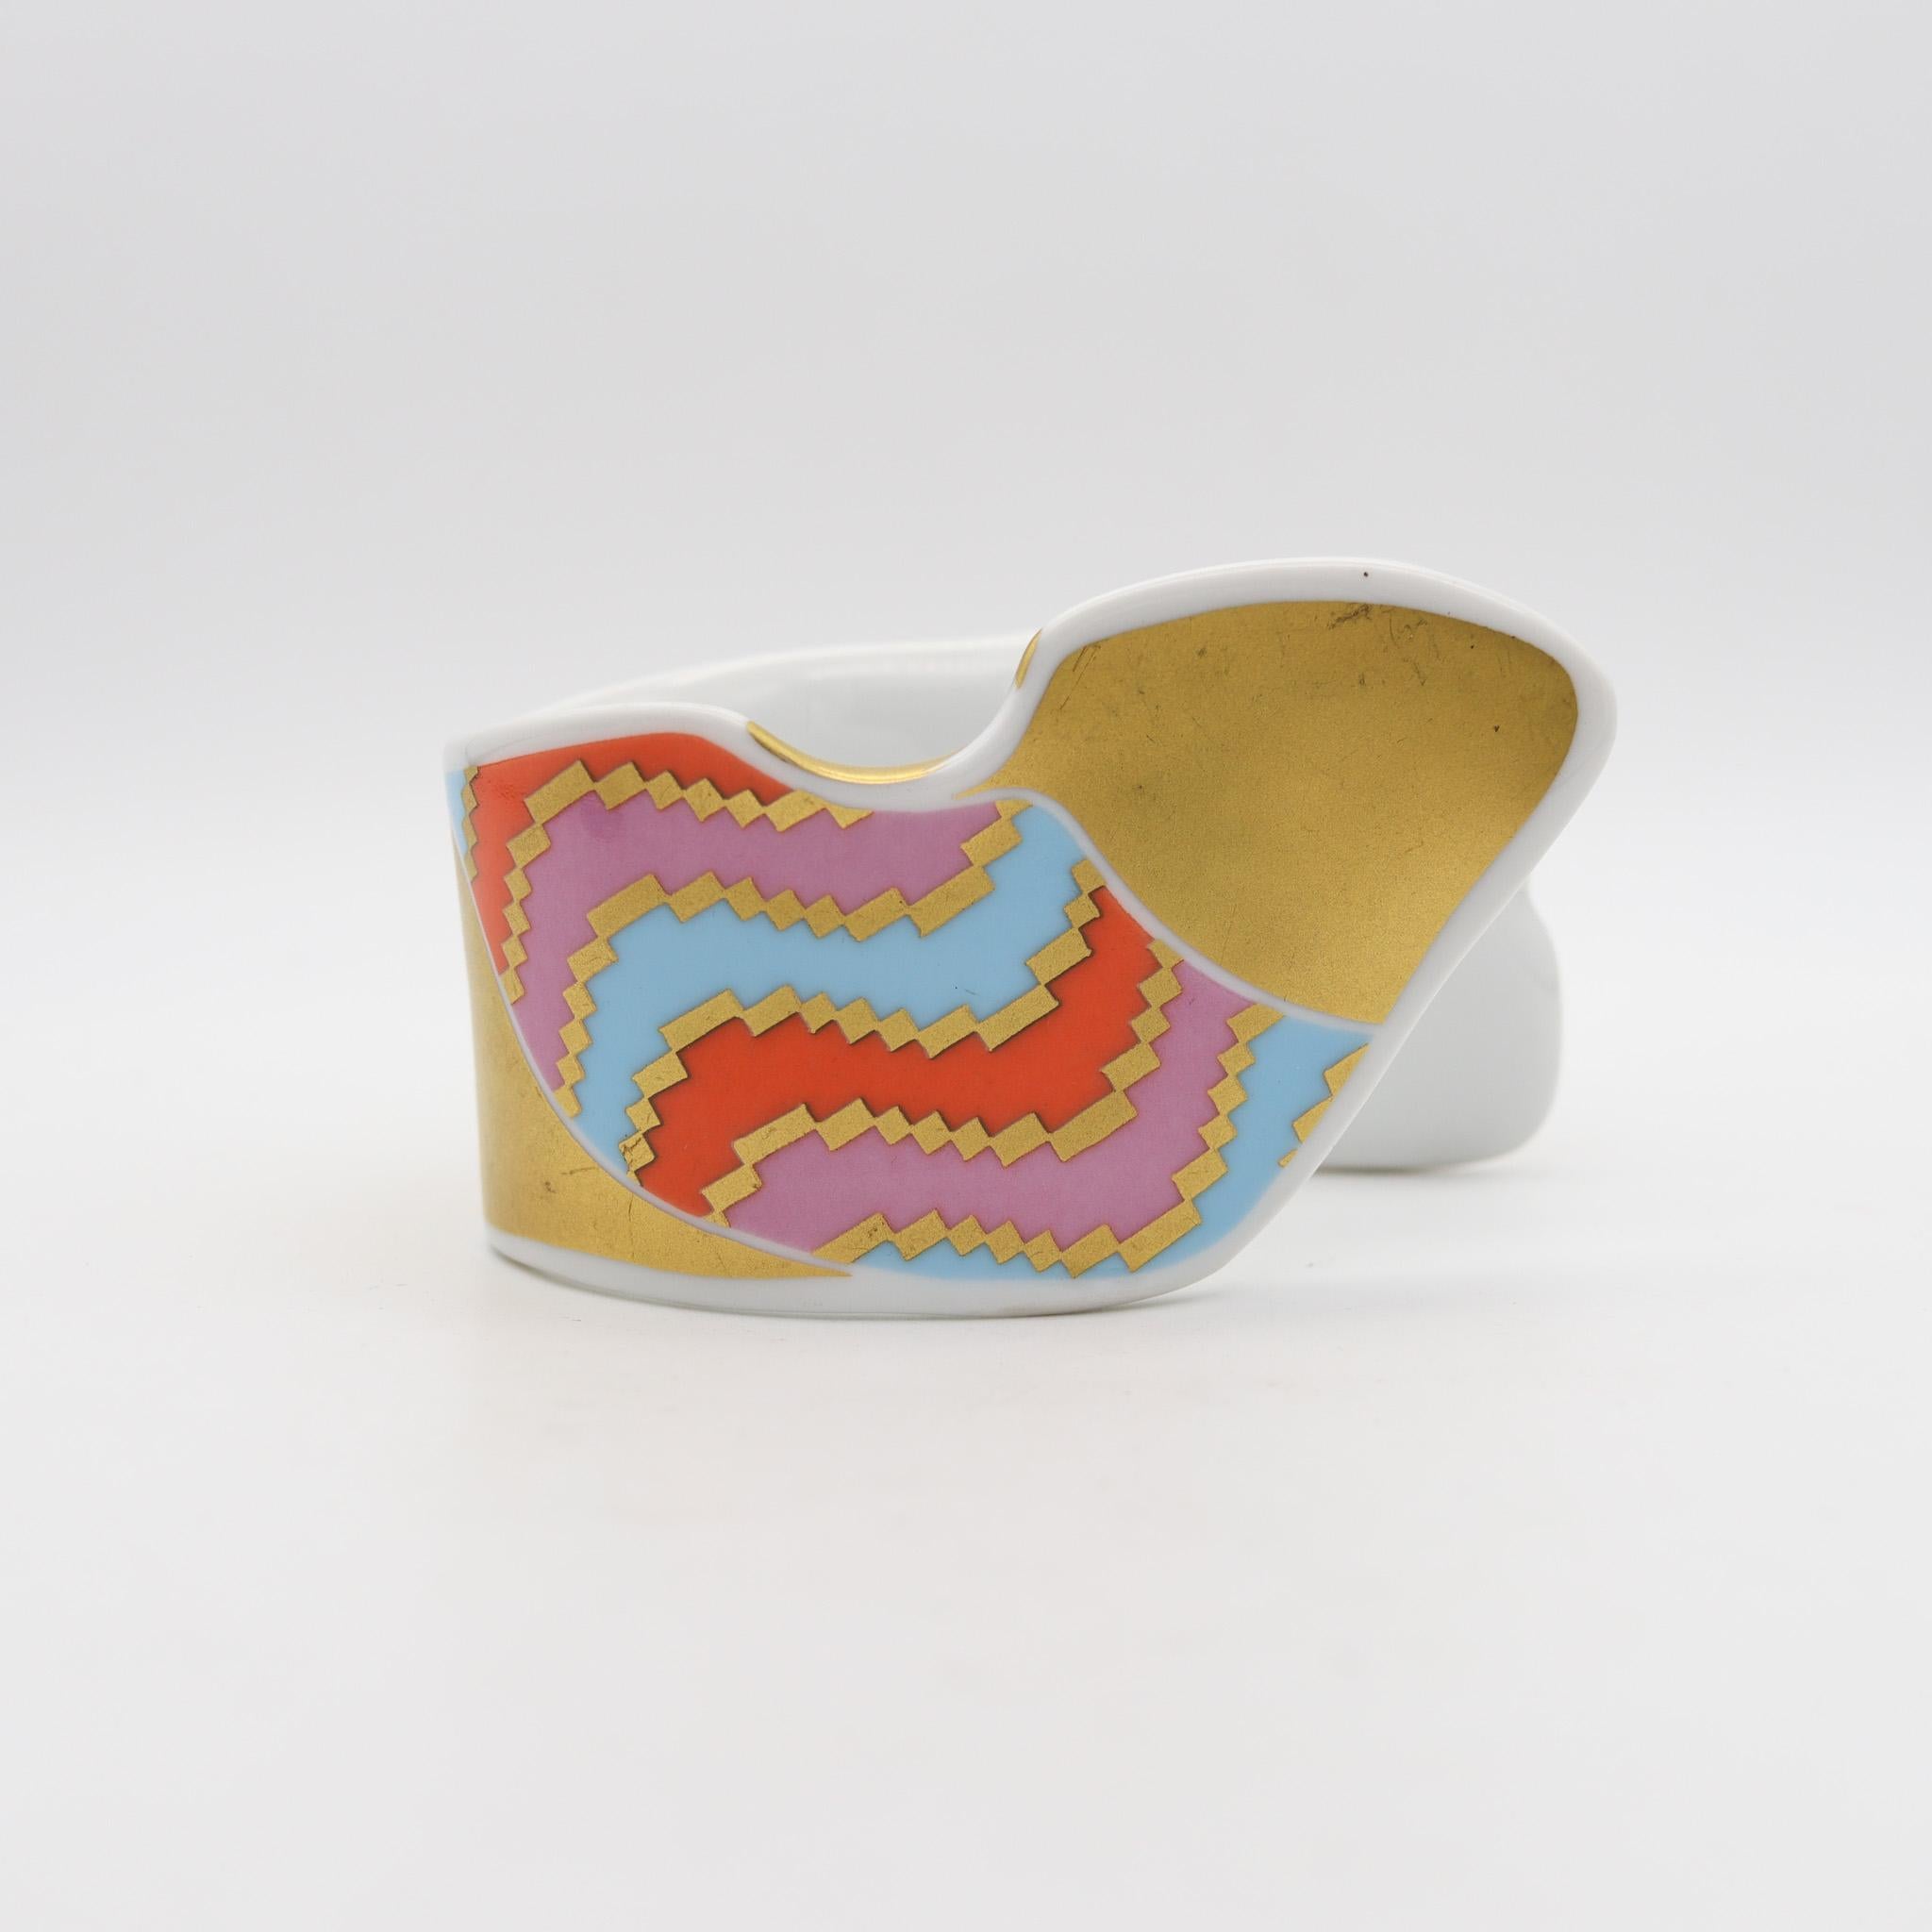 A porcelain cuff bracelet designed by Johan Gerard van Loon for Rosenthal.

This is a very rare retired statement bracelet made by Dutch artist Johan Van Loon for the German porcelain company of Rosenthal, back in the 1970's This beautiful abstract